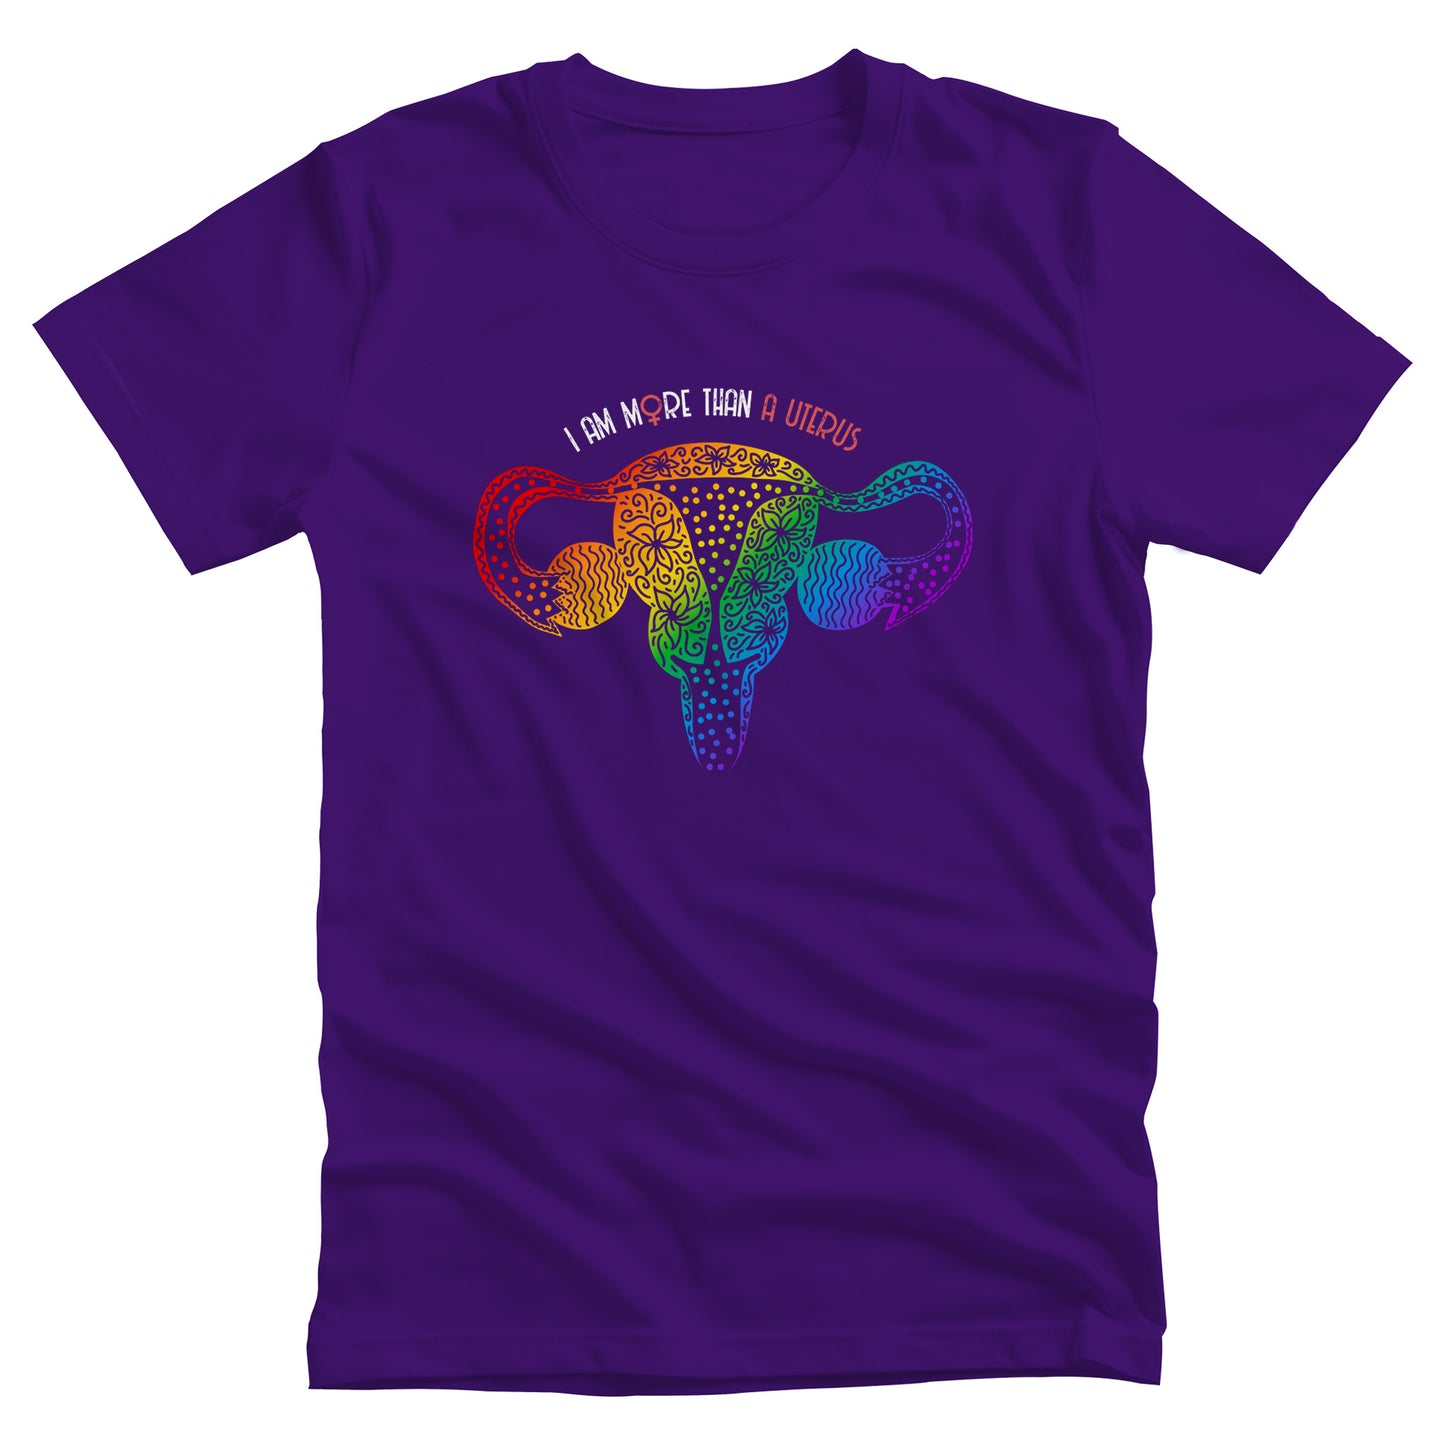 Team Purple color unisex t-shirt that says, “I am More Than a Uterus” in all caps. The “O” in “more” is the symbol for the female gender. The text is arched slightly over an illustration of a uterus made from swirls and flowers in a rainbow-gradient color.